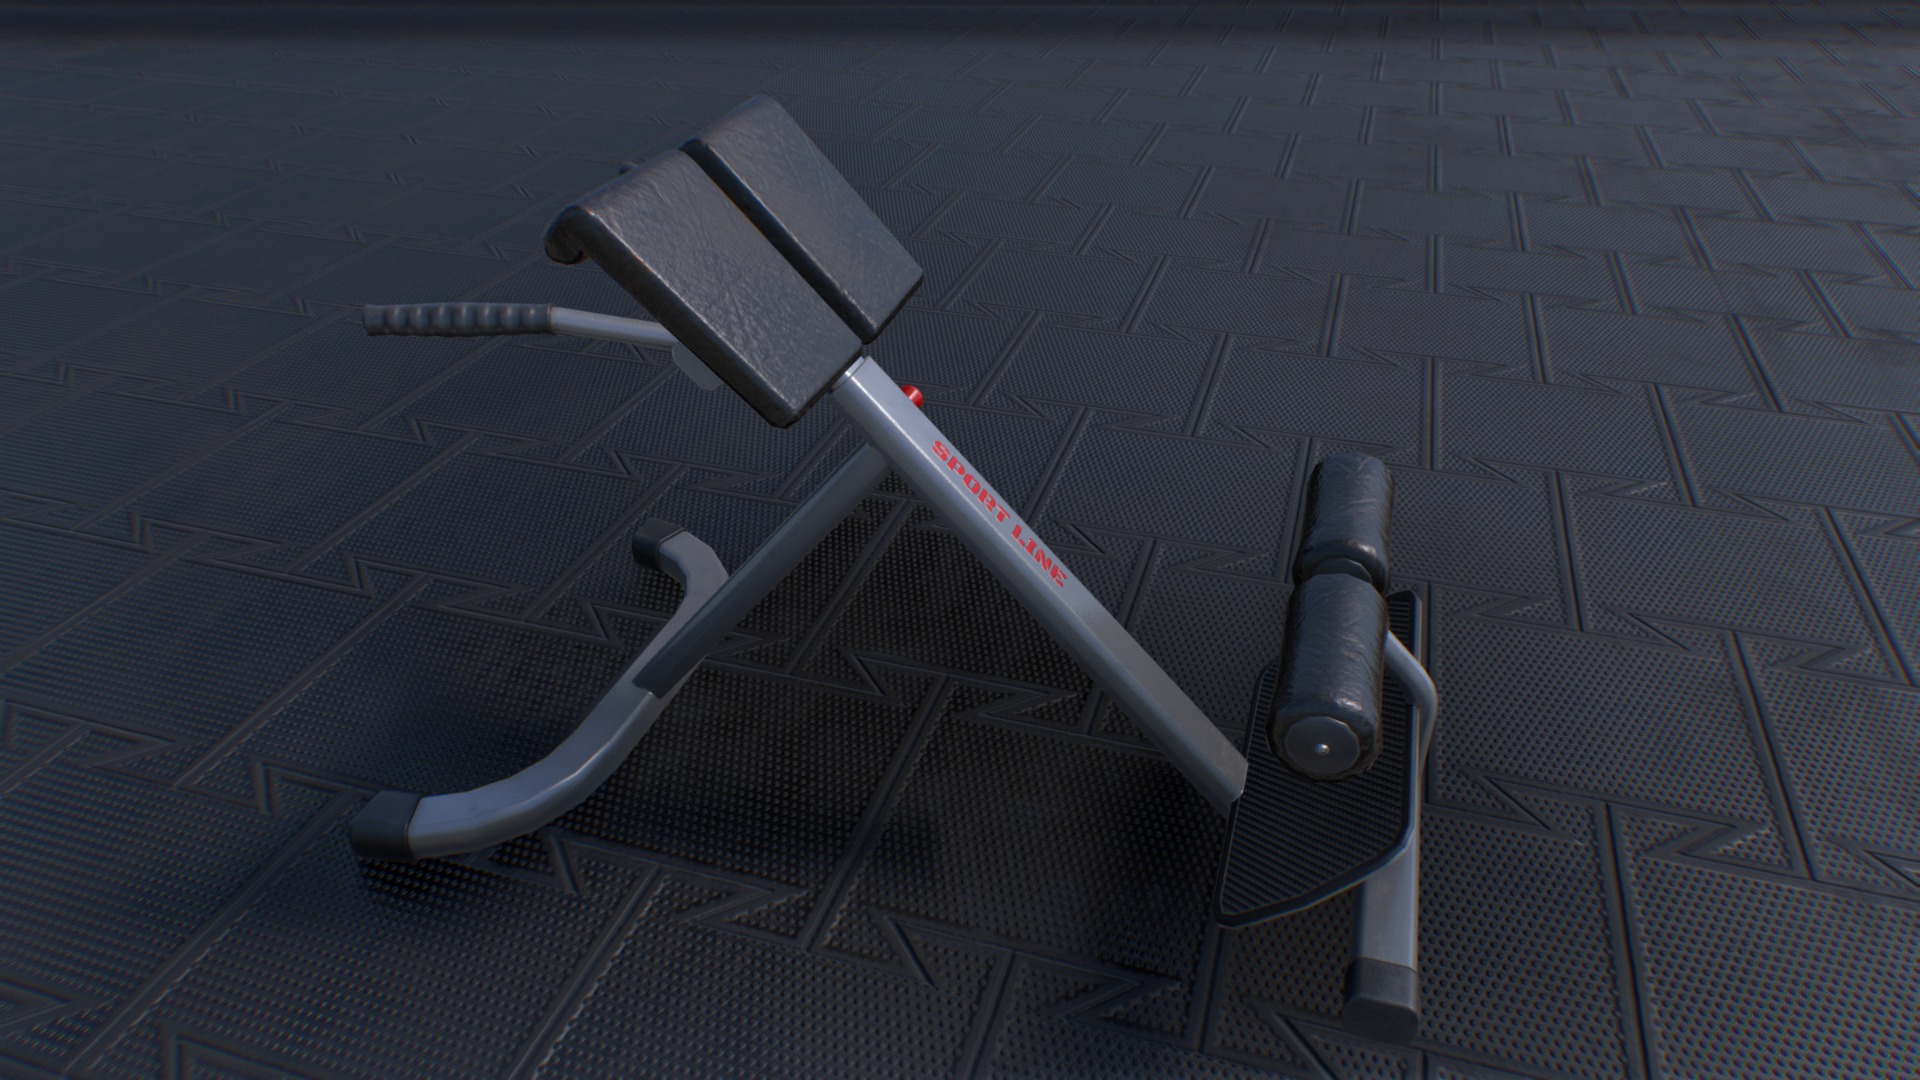 3D model Hyperextension Bench FBX - This is a 3D model of the Hyperextension Bench FBX. The 3D model is about a group of metal objects.